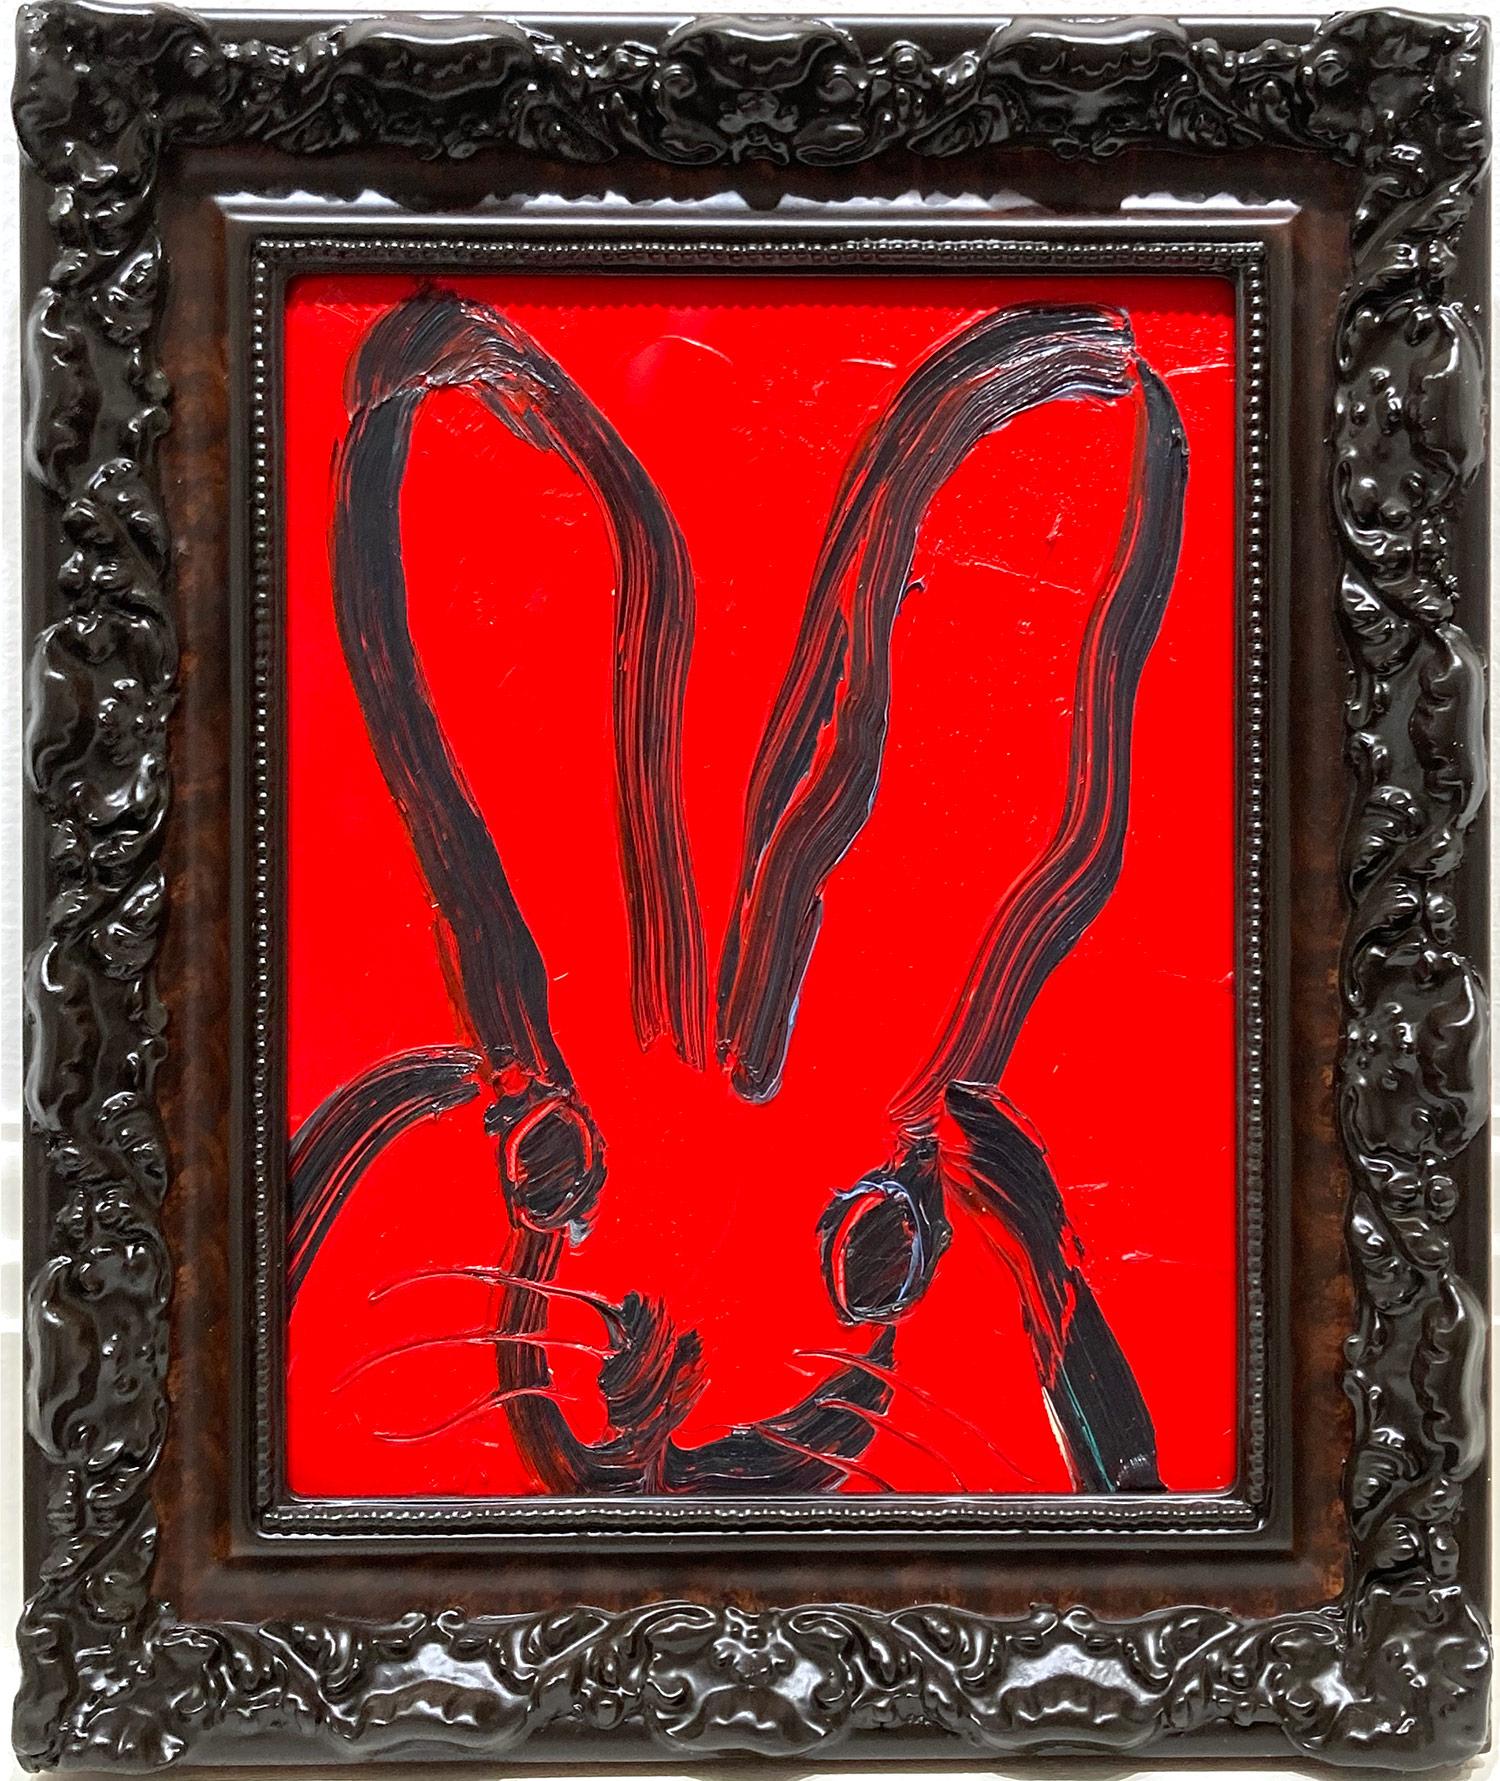 Hunt Slonem Abstract Painting - "Untitled" Black Outlined Bunny on Candy Apple Red Background with Frame